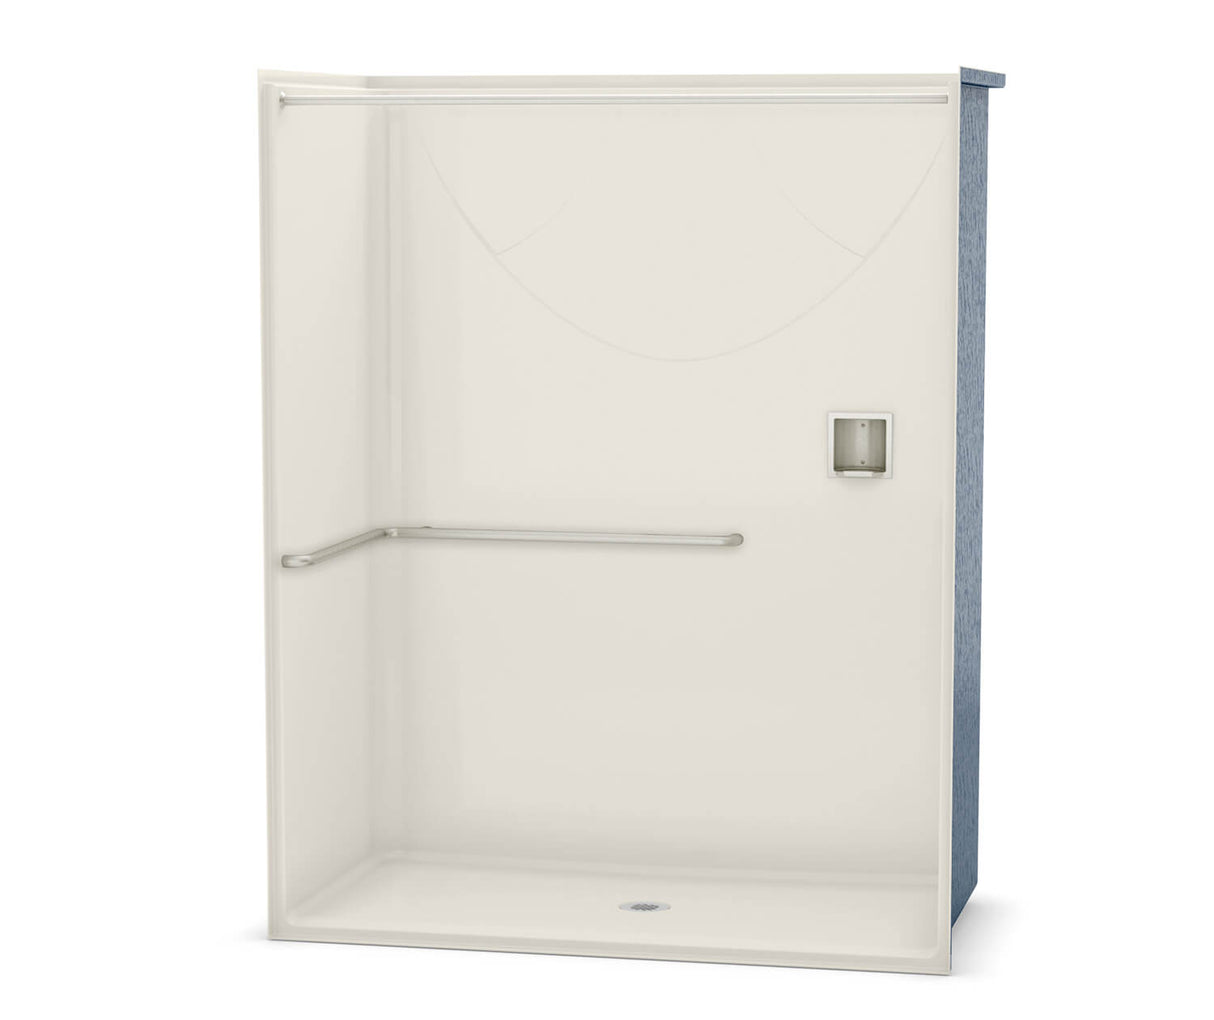 Aker OPS-6030 AcrylX Alcove Center Drain One-Piece Shower in Biscuit - ADA L-Bar